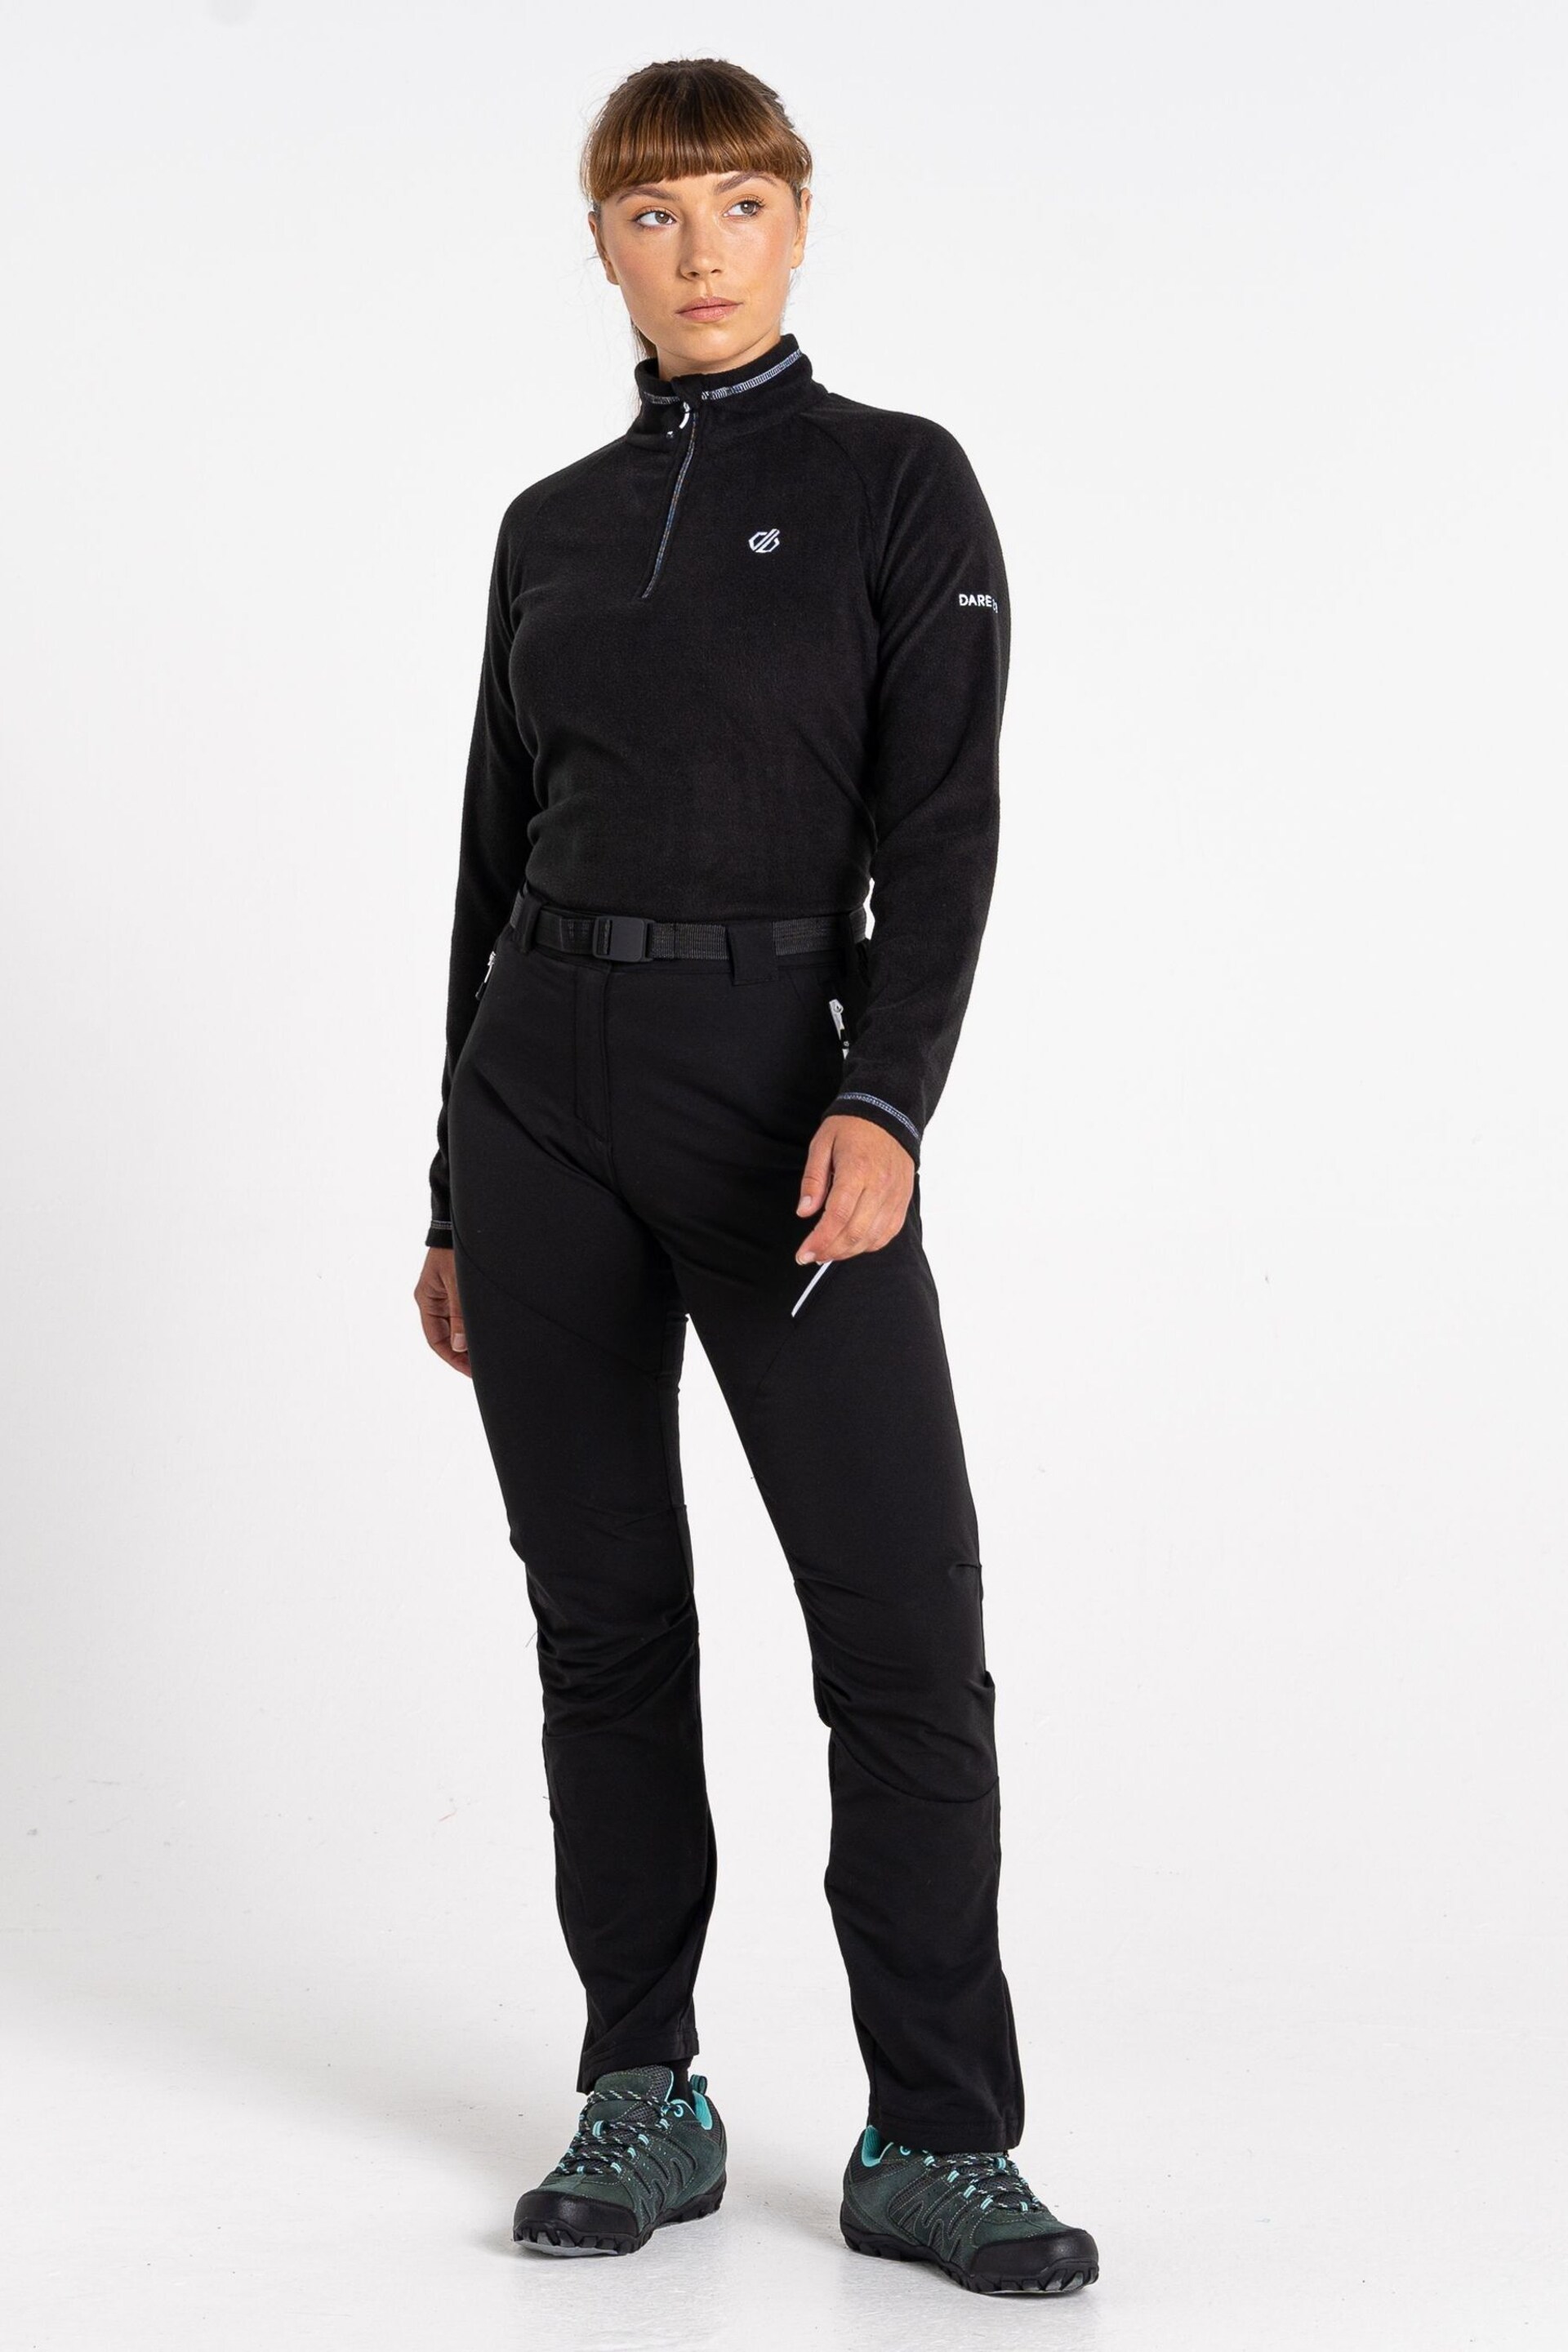 Dare 2b Melodic Pro Stretch Black Trousers - Image 1 of 6